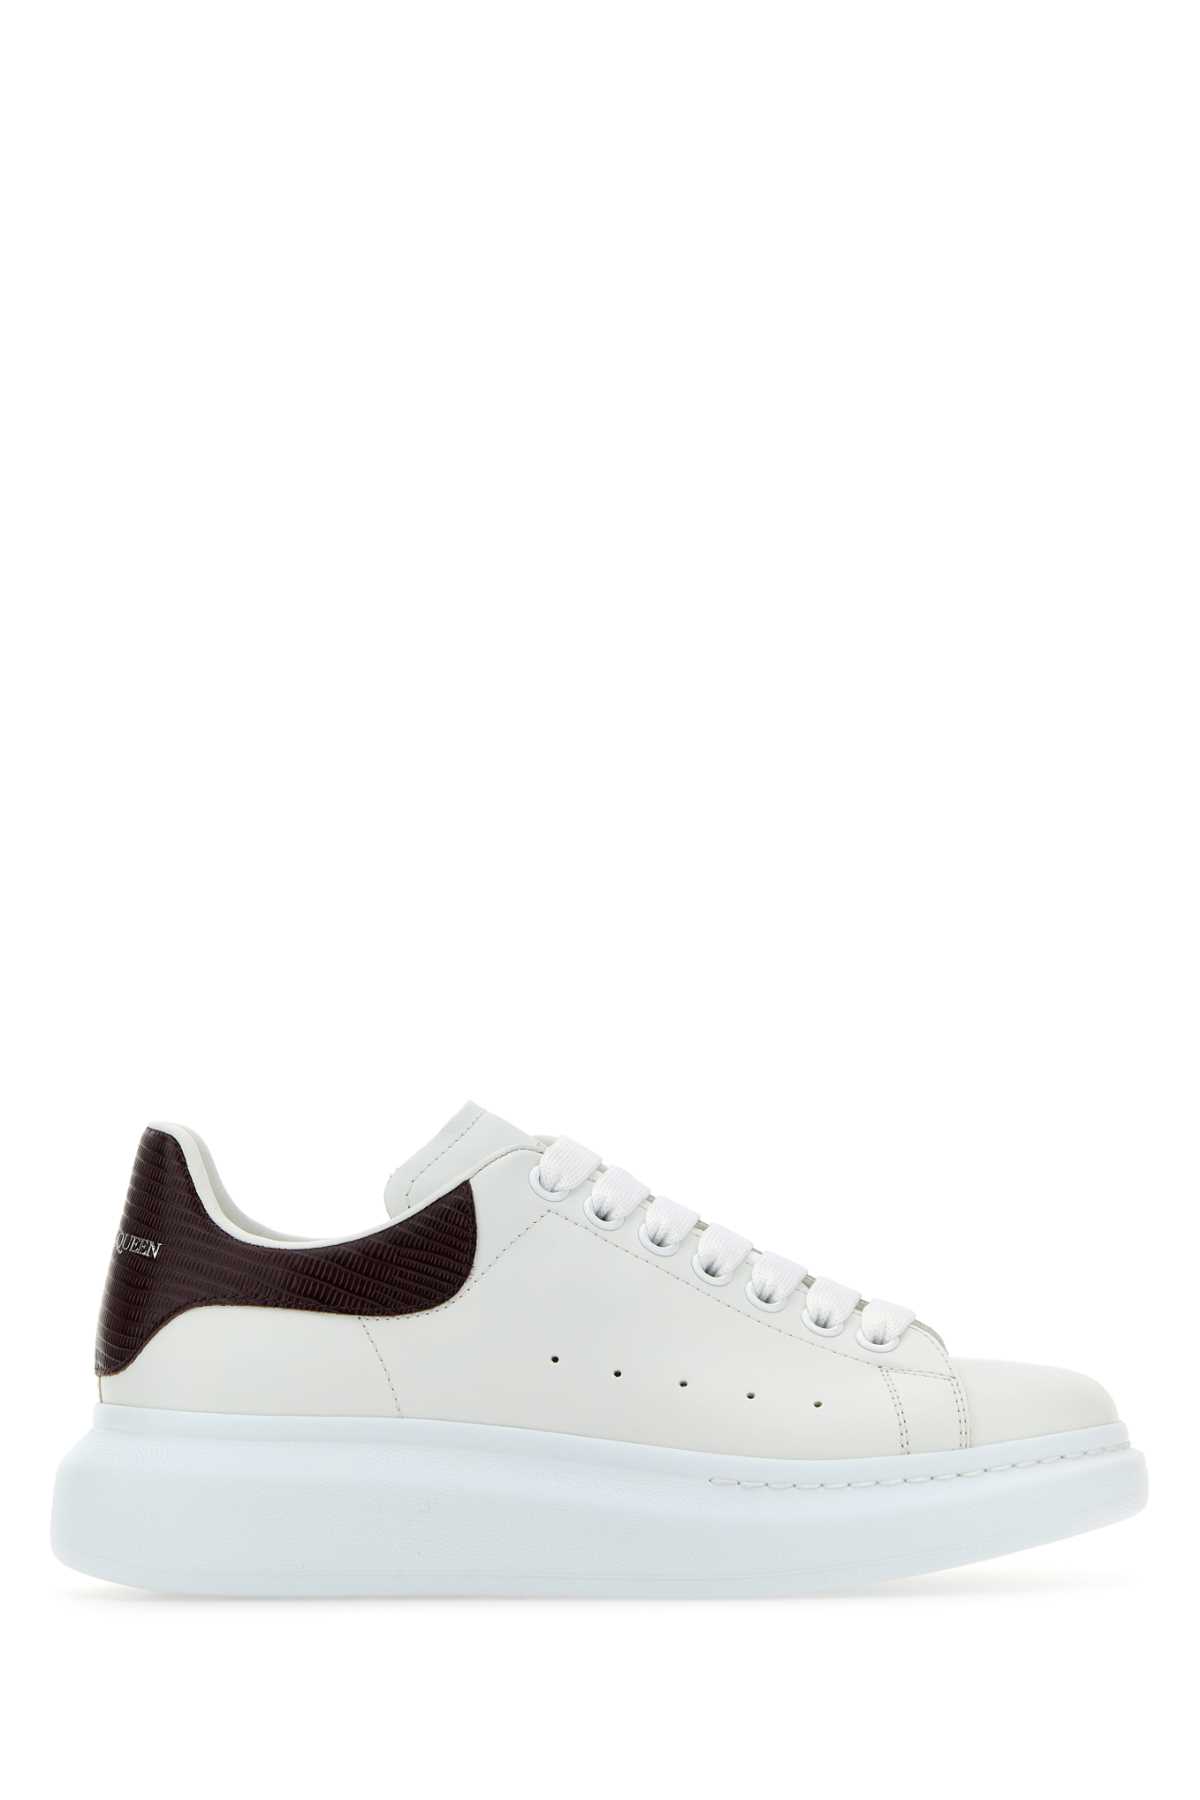 Shop Alexander Mcqueen White Leather Sneakers With Burgundy Leather Heel In Whiteburgundy